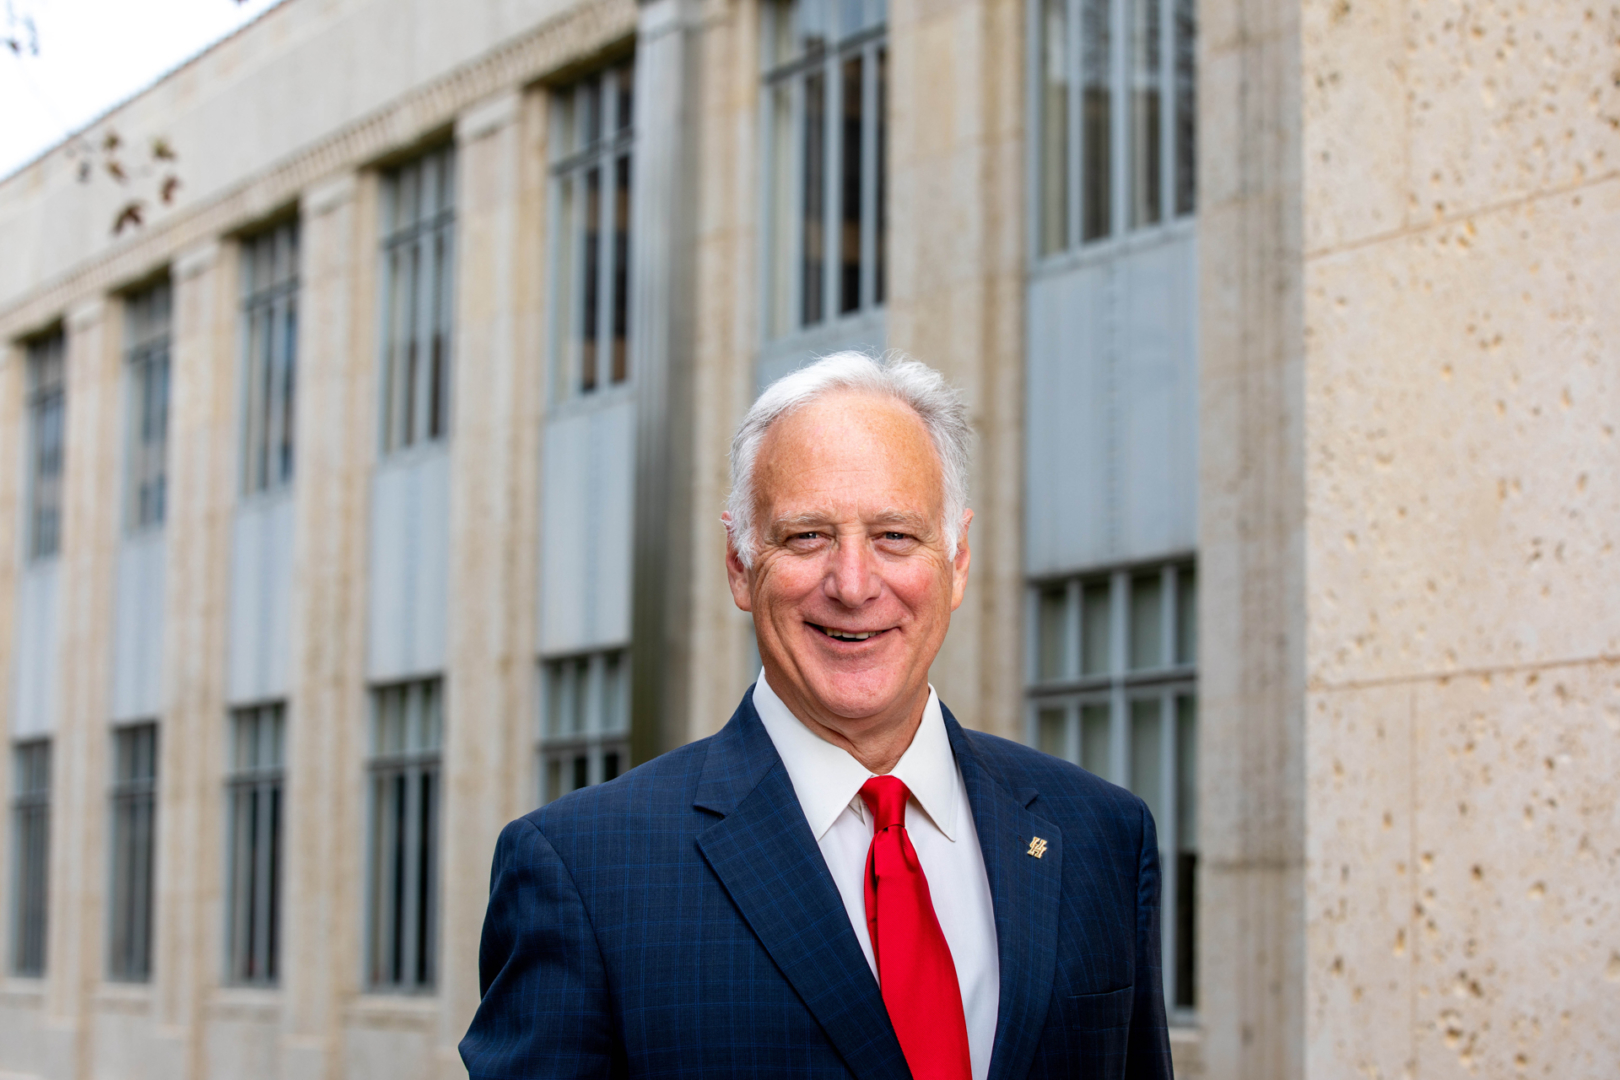 Former state lawmaker Kirk Watson announced his resignation from the Texas Senate in February to become the Hobby School of Public Affairs' founding dean. | Courtesy of University of Houston